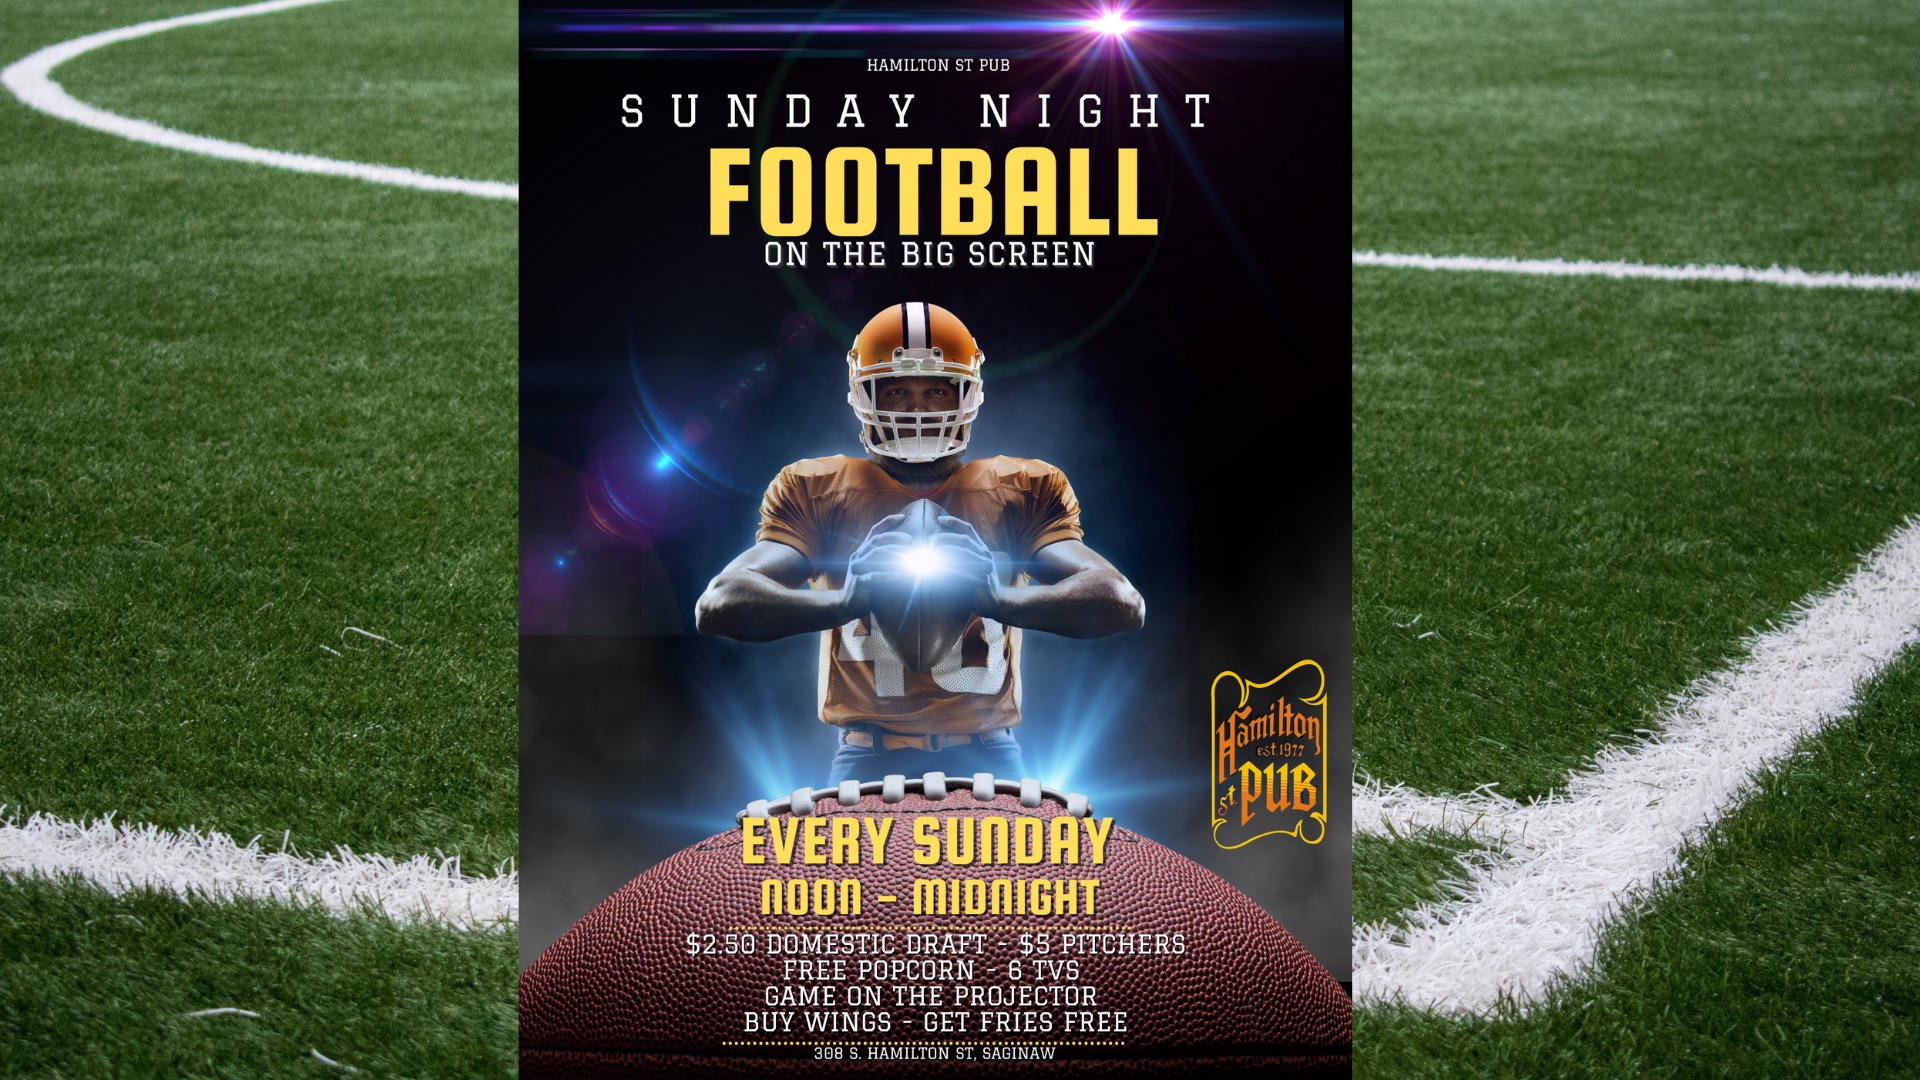 SUNDAY FOOTBALL | Food & Drink Specials | Game on the Big Screen!